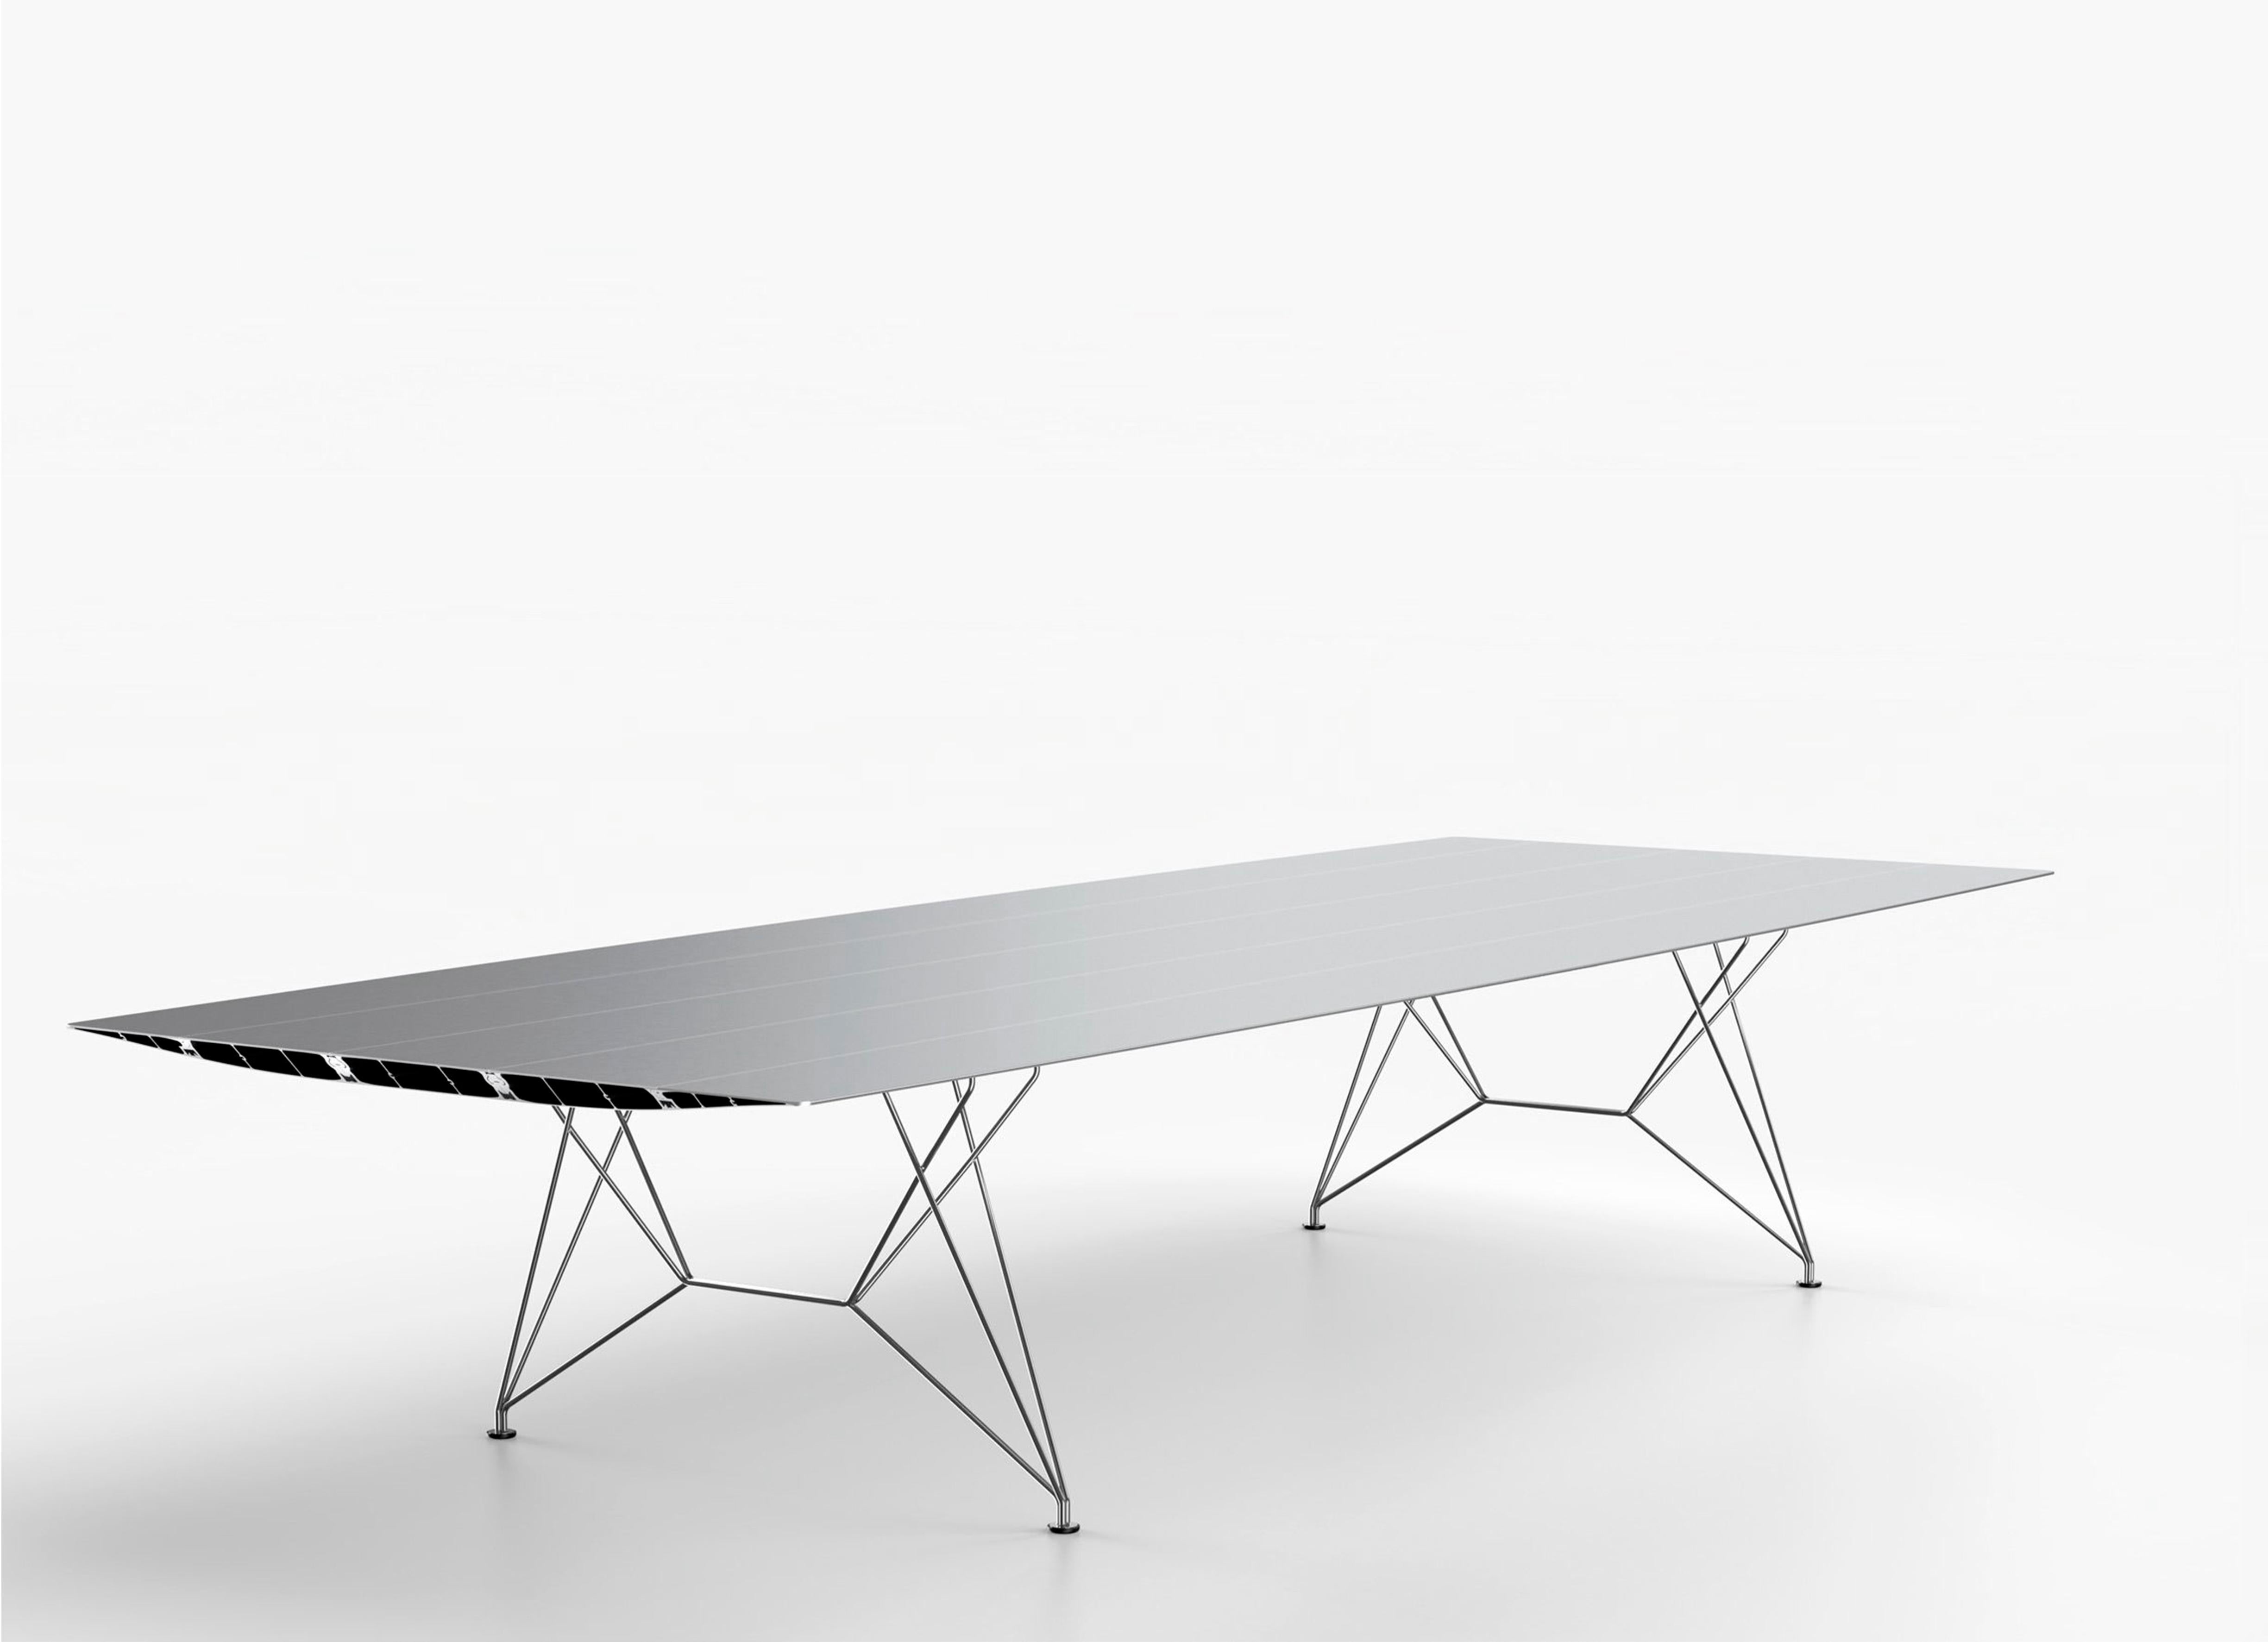 B-150 Table, in extrusioned aluminium with stainless steel rod legs. 

Designed by Konstantin Grcic in 2021, manufactured by BD Barcelona.

Konstantin Grcic opened the Extrusions collection with the Table B, in 2009. Grcic has been inspired by